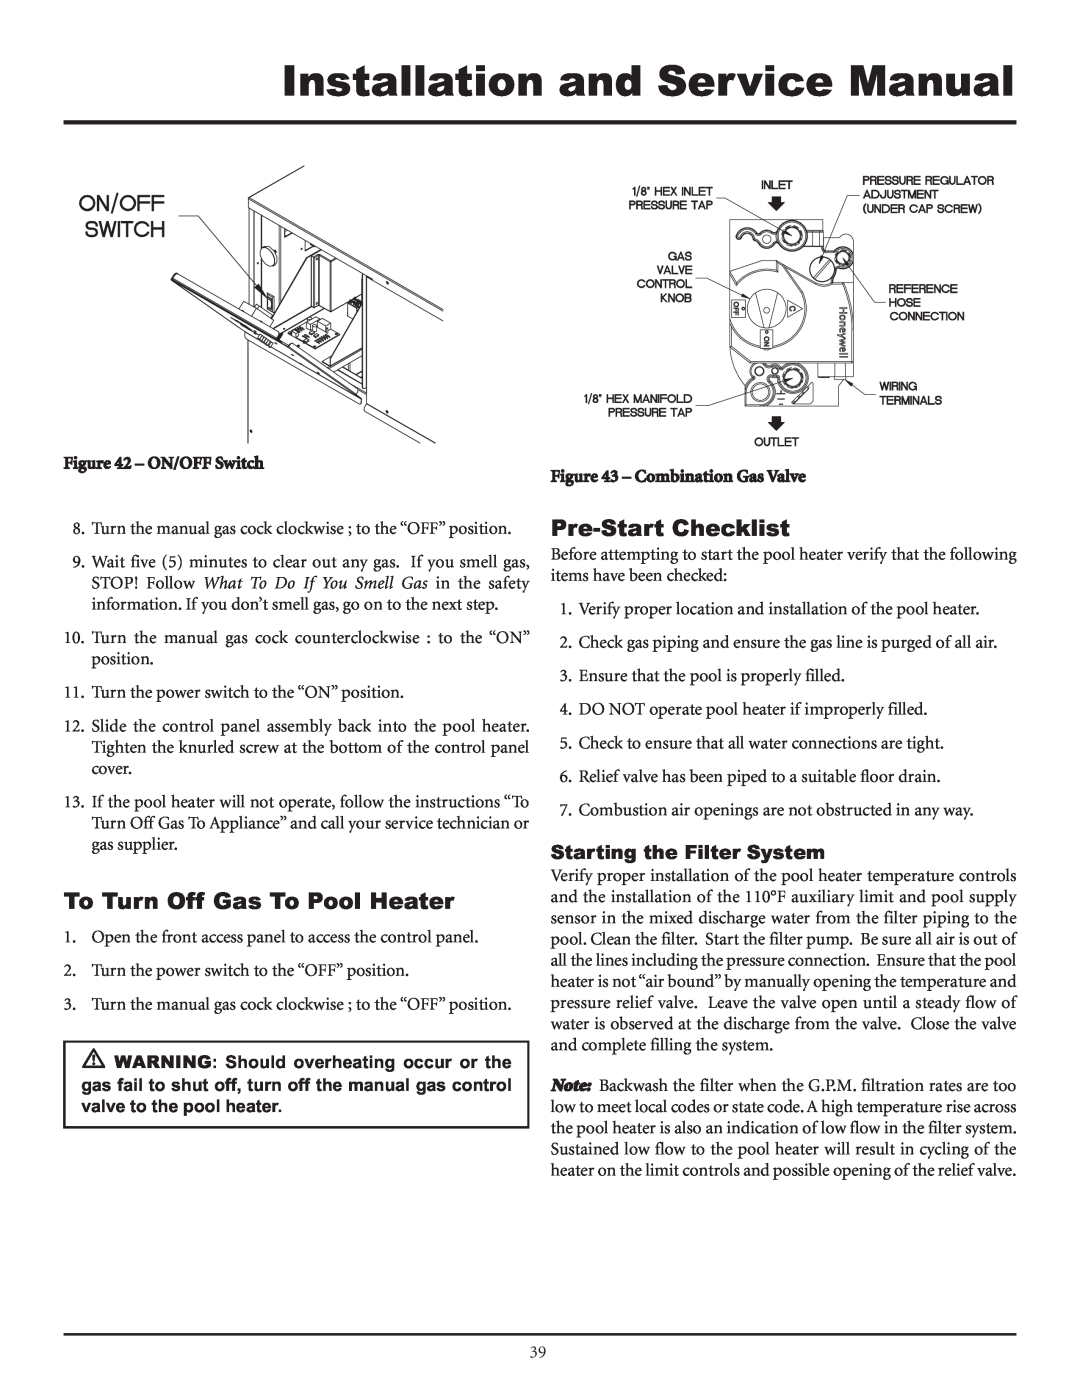 Lochinvar F0600187510 service manual To Turn Off Gas To Pool Heater, Pre-StartChecklist, Starting the Filter System 